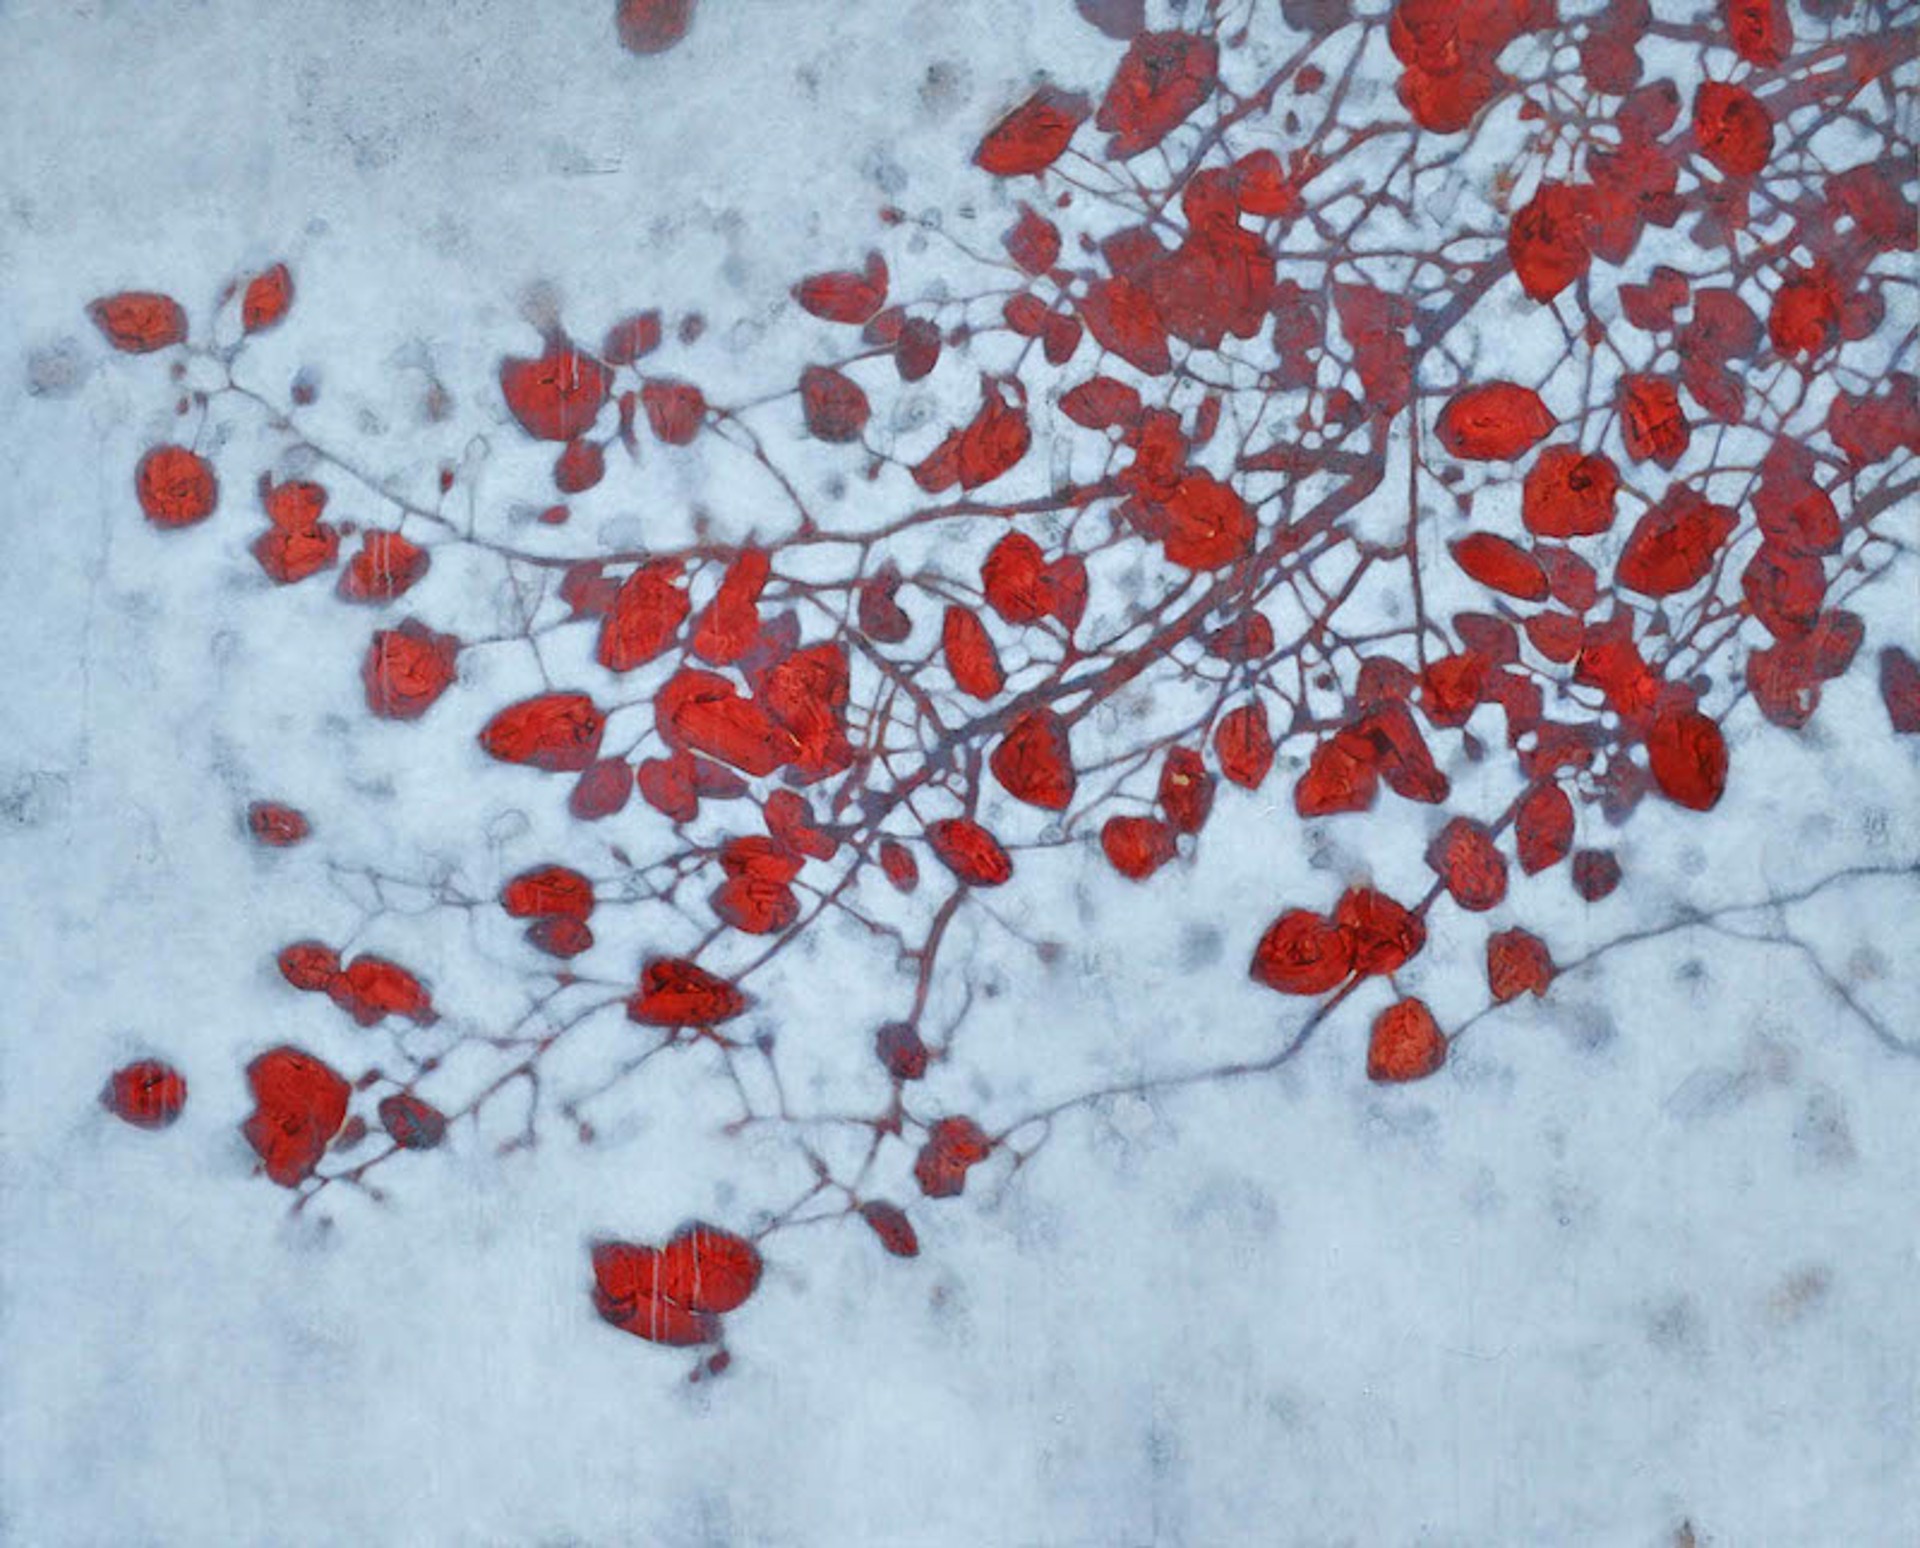 Red Leaves at Dusk by David Kidd